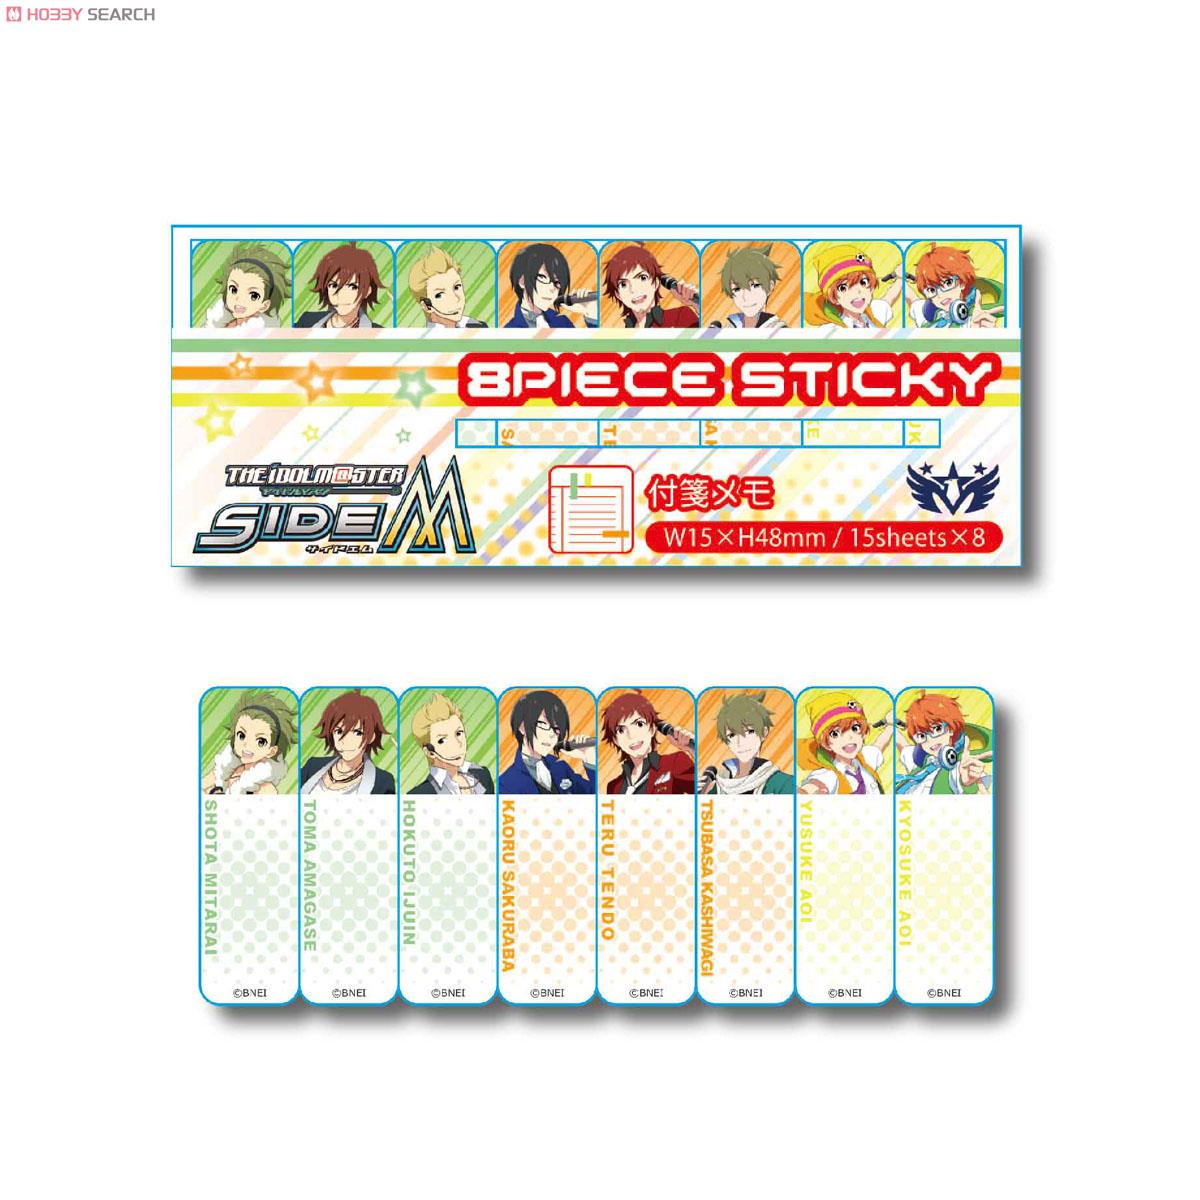 8Pふせん THE IDOLM＠STER SideM/集合1 (キャラクターグッズ) 商品画像1